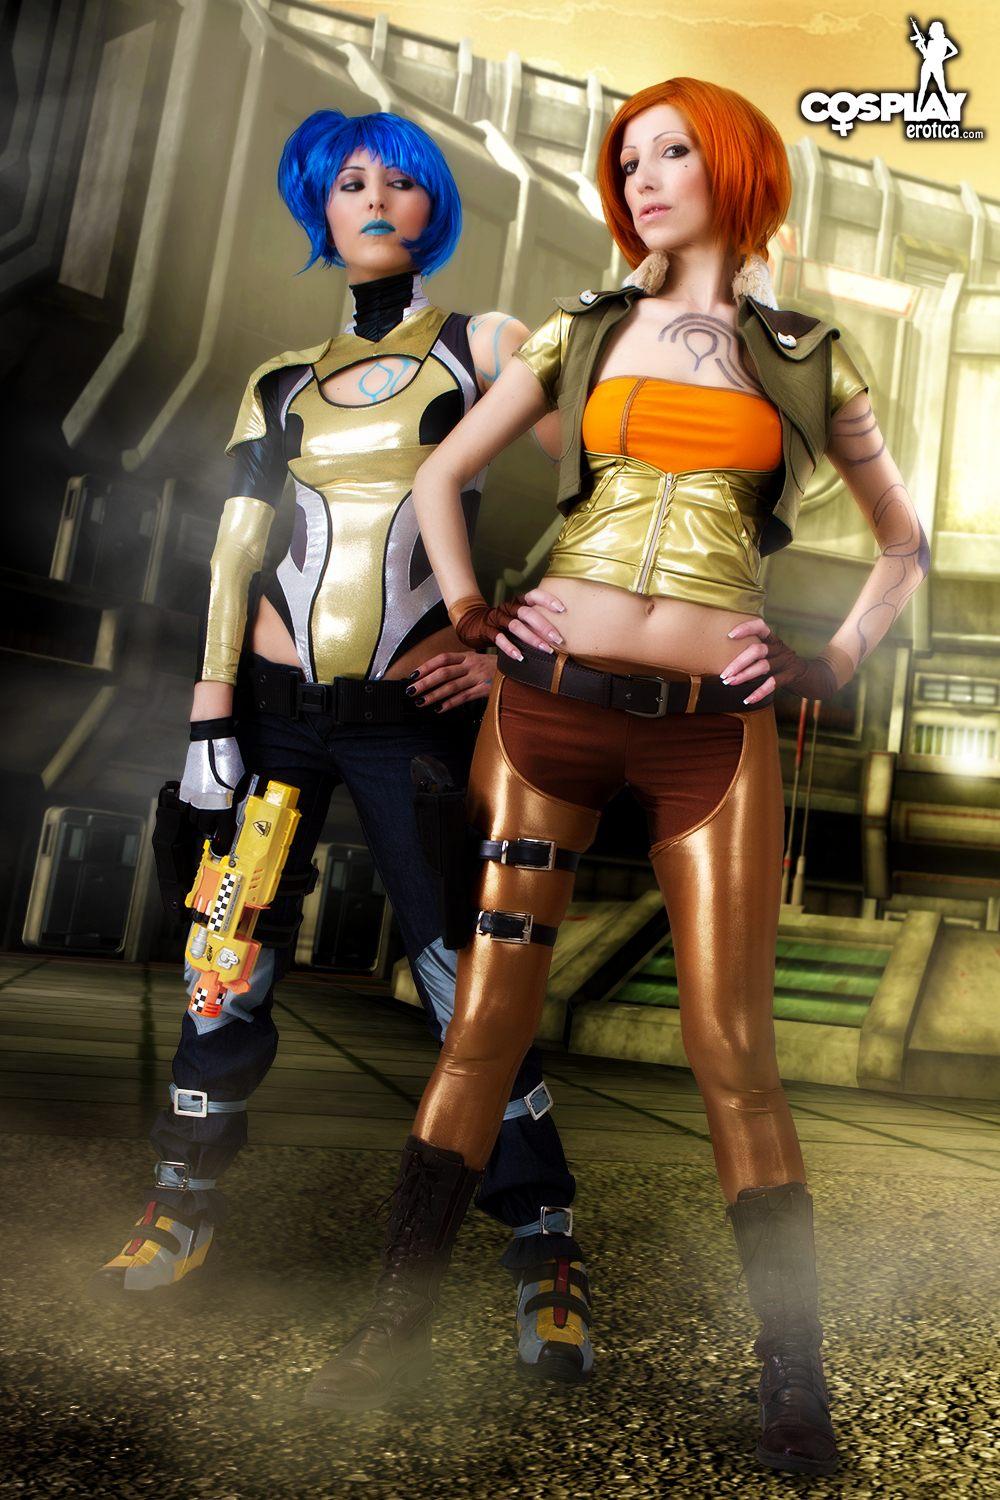 Hot cosplayers Anne and Angela do a sexy Borderlands lesbian scene #53179537